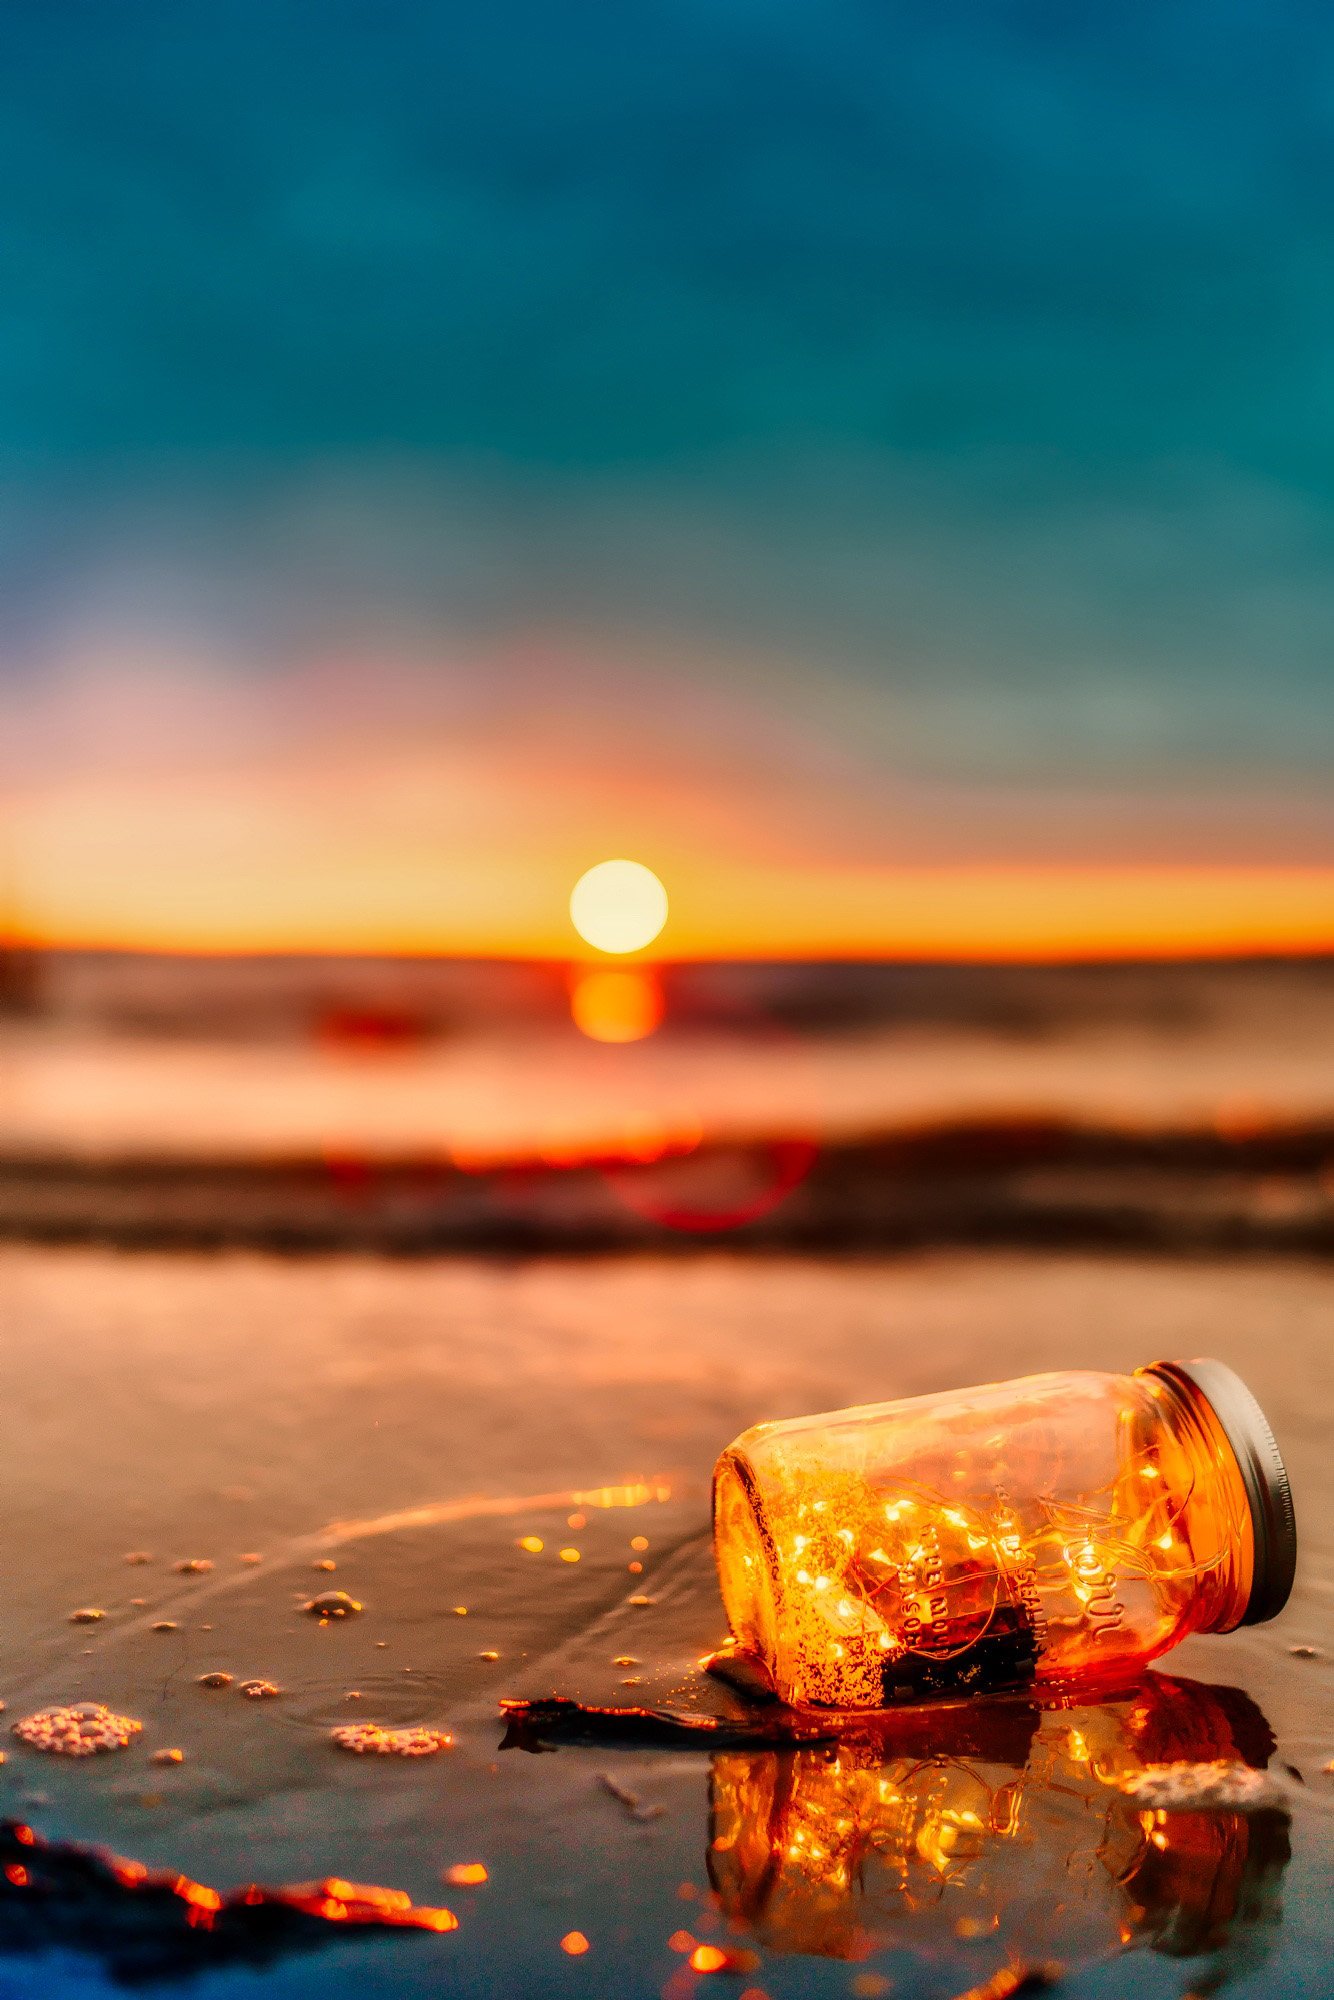 Bottle With Ship On The Beach At Sunset Image Free Stock